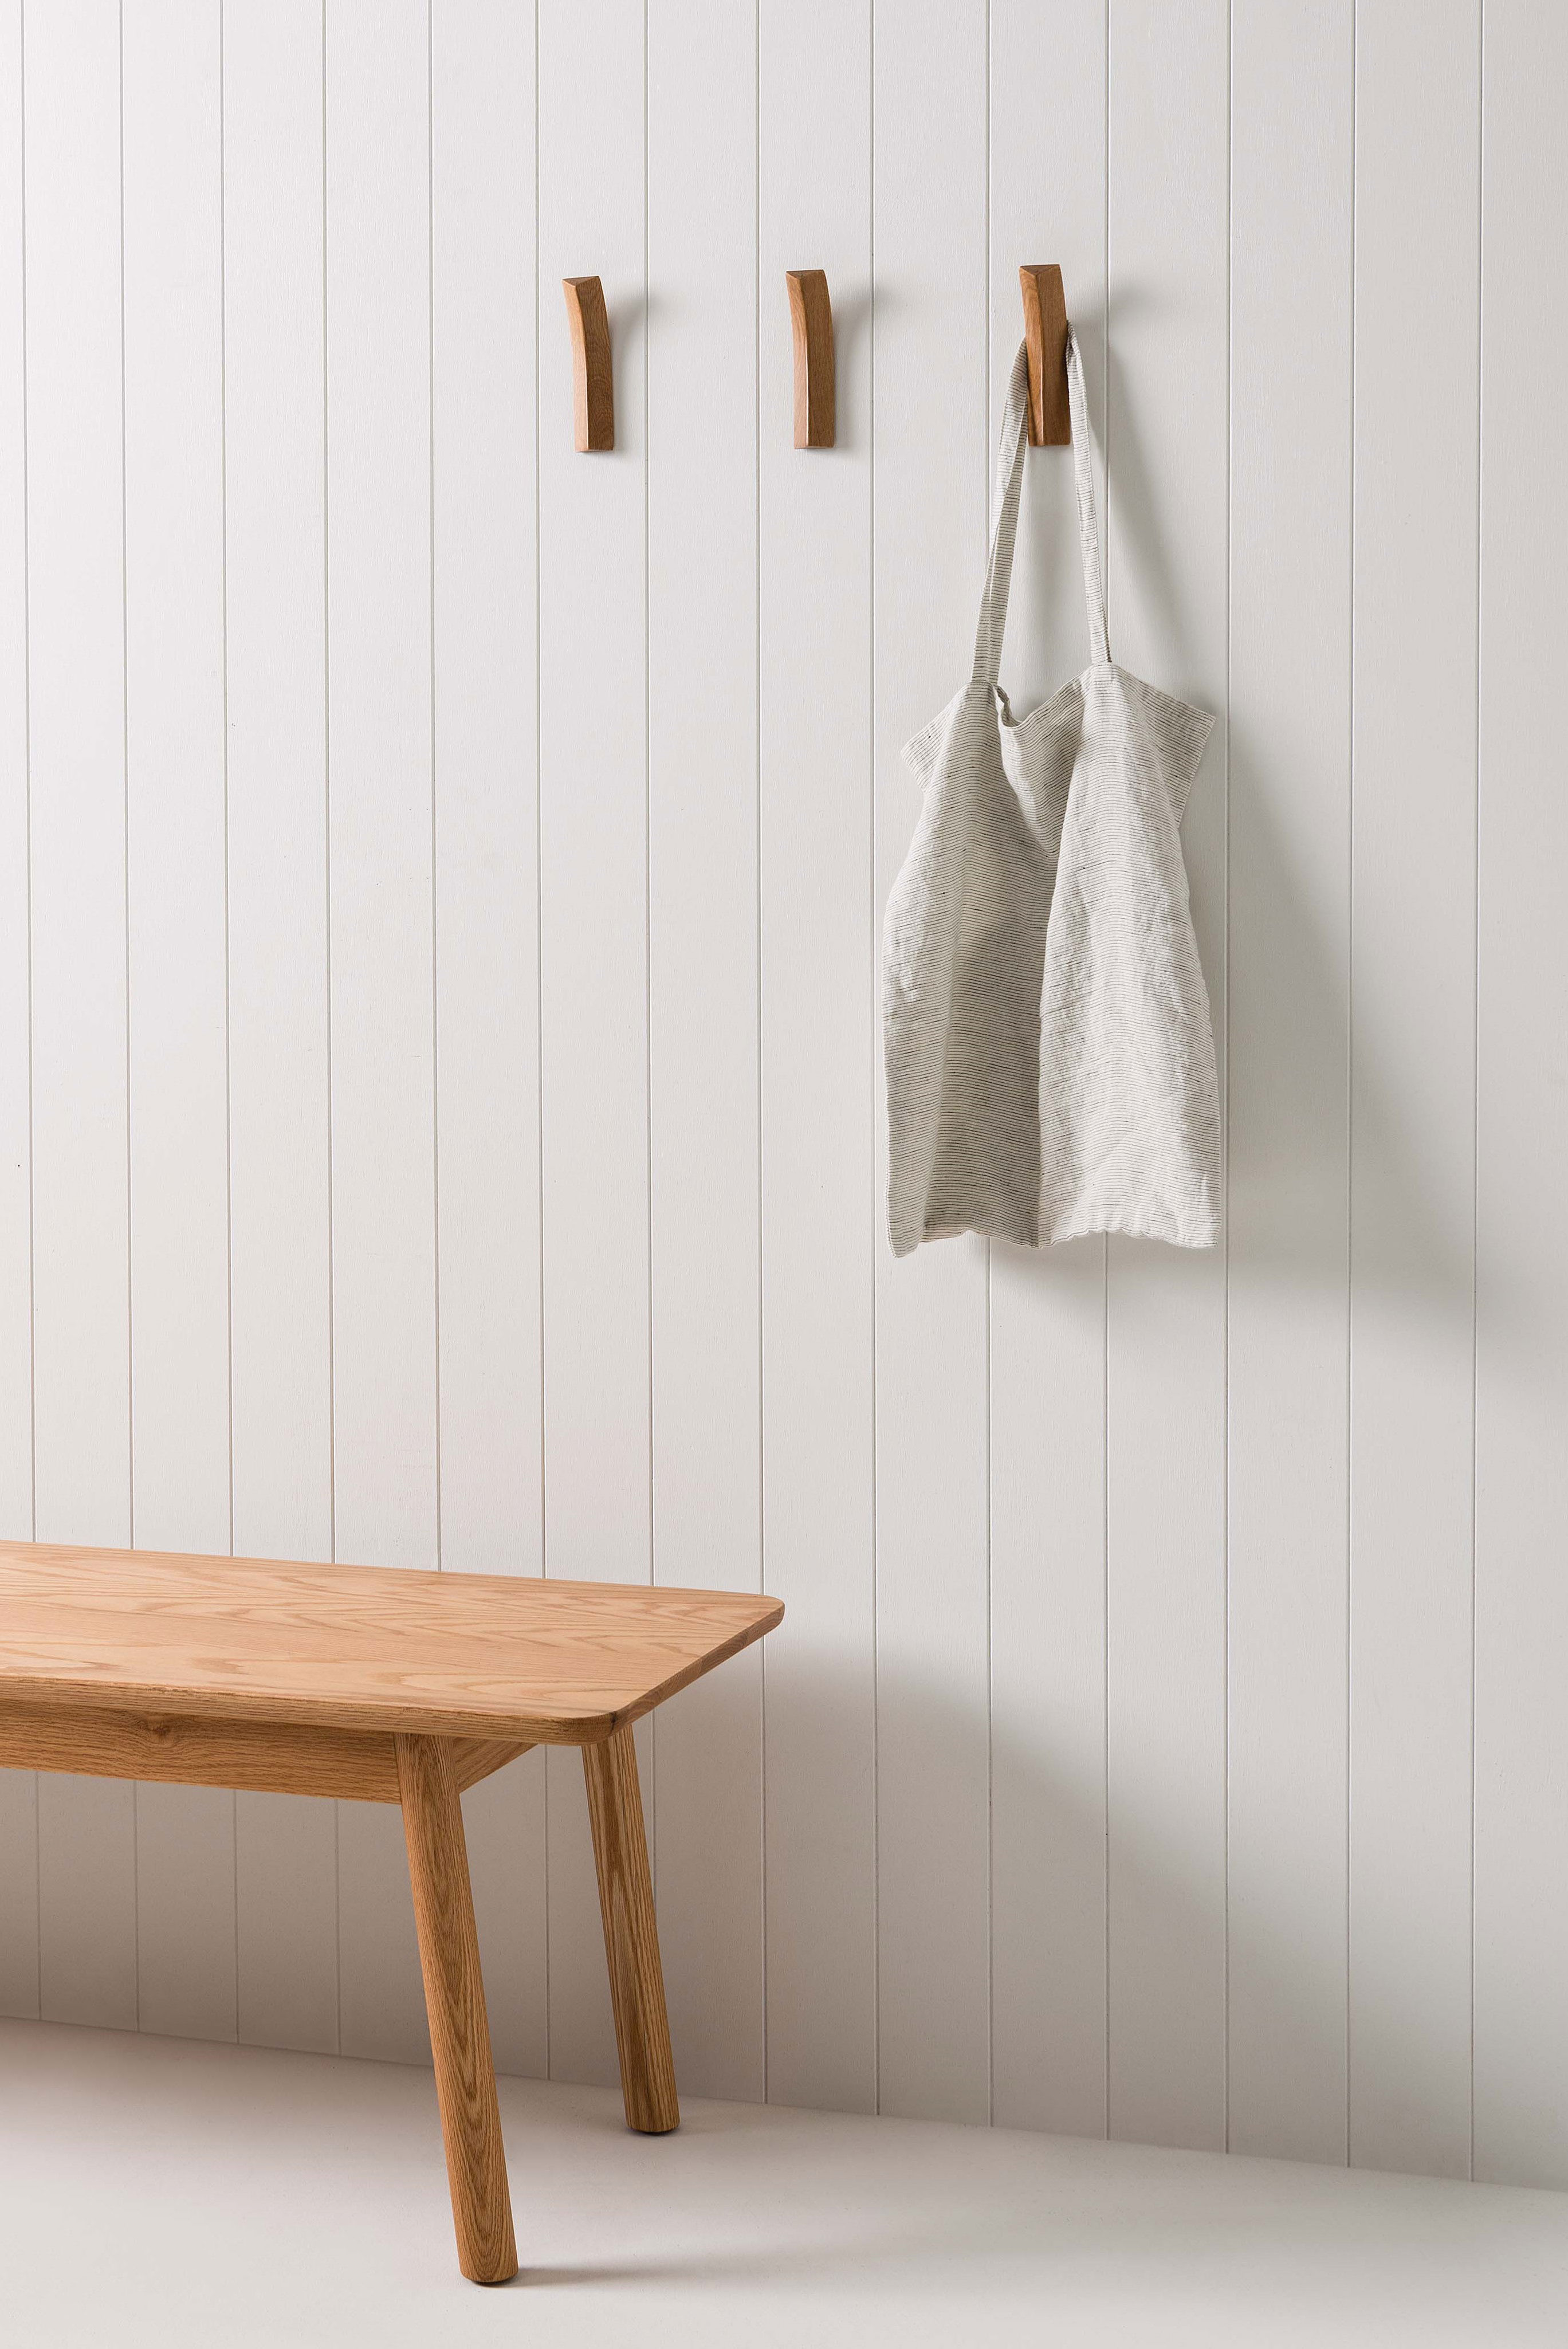 Bow Wall Hooks – Allthingscurated